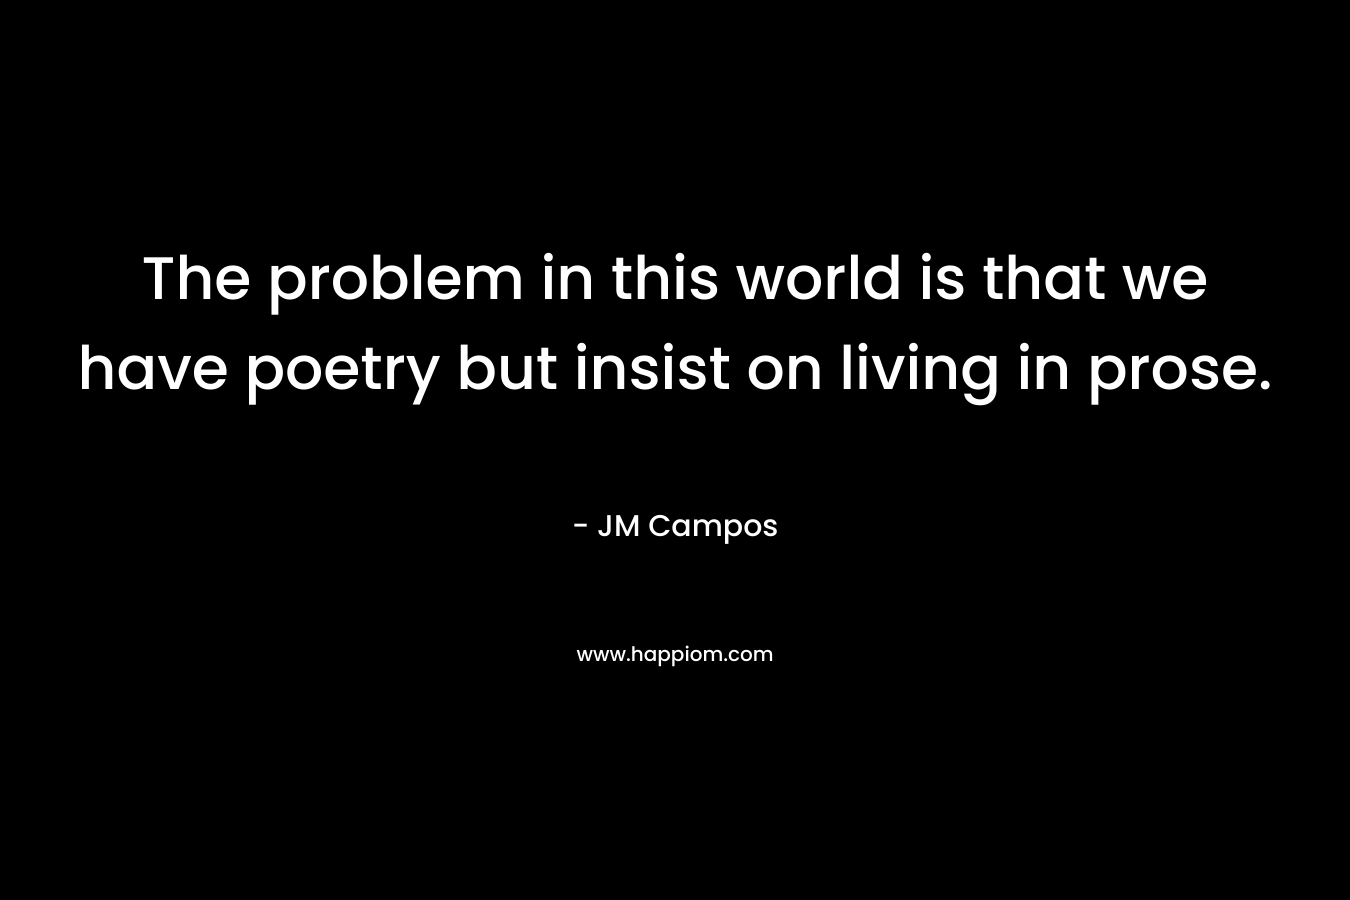 The problem in this world is that we have poetry but insist on living in prose.